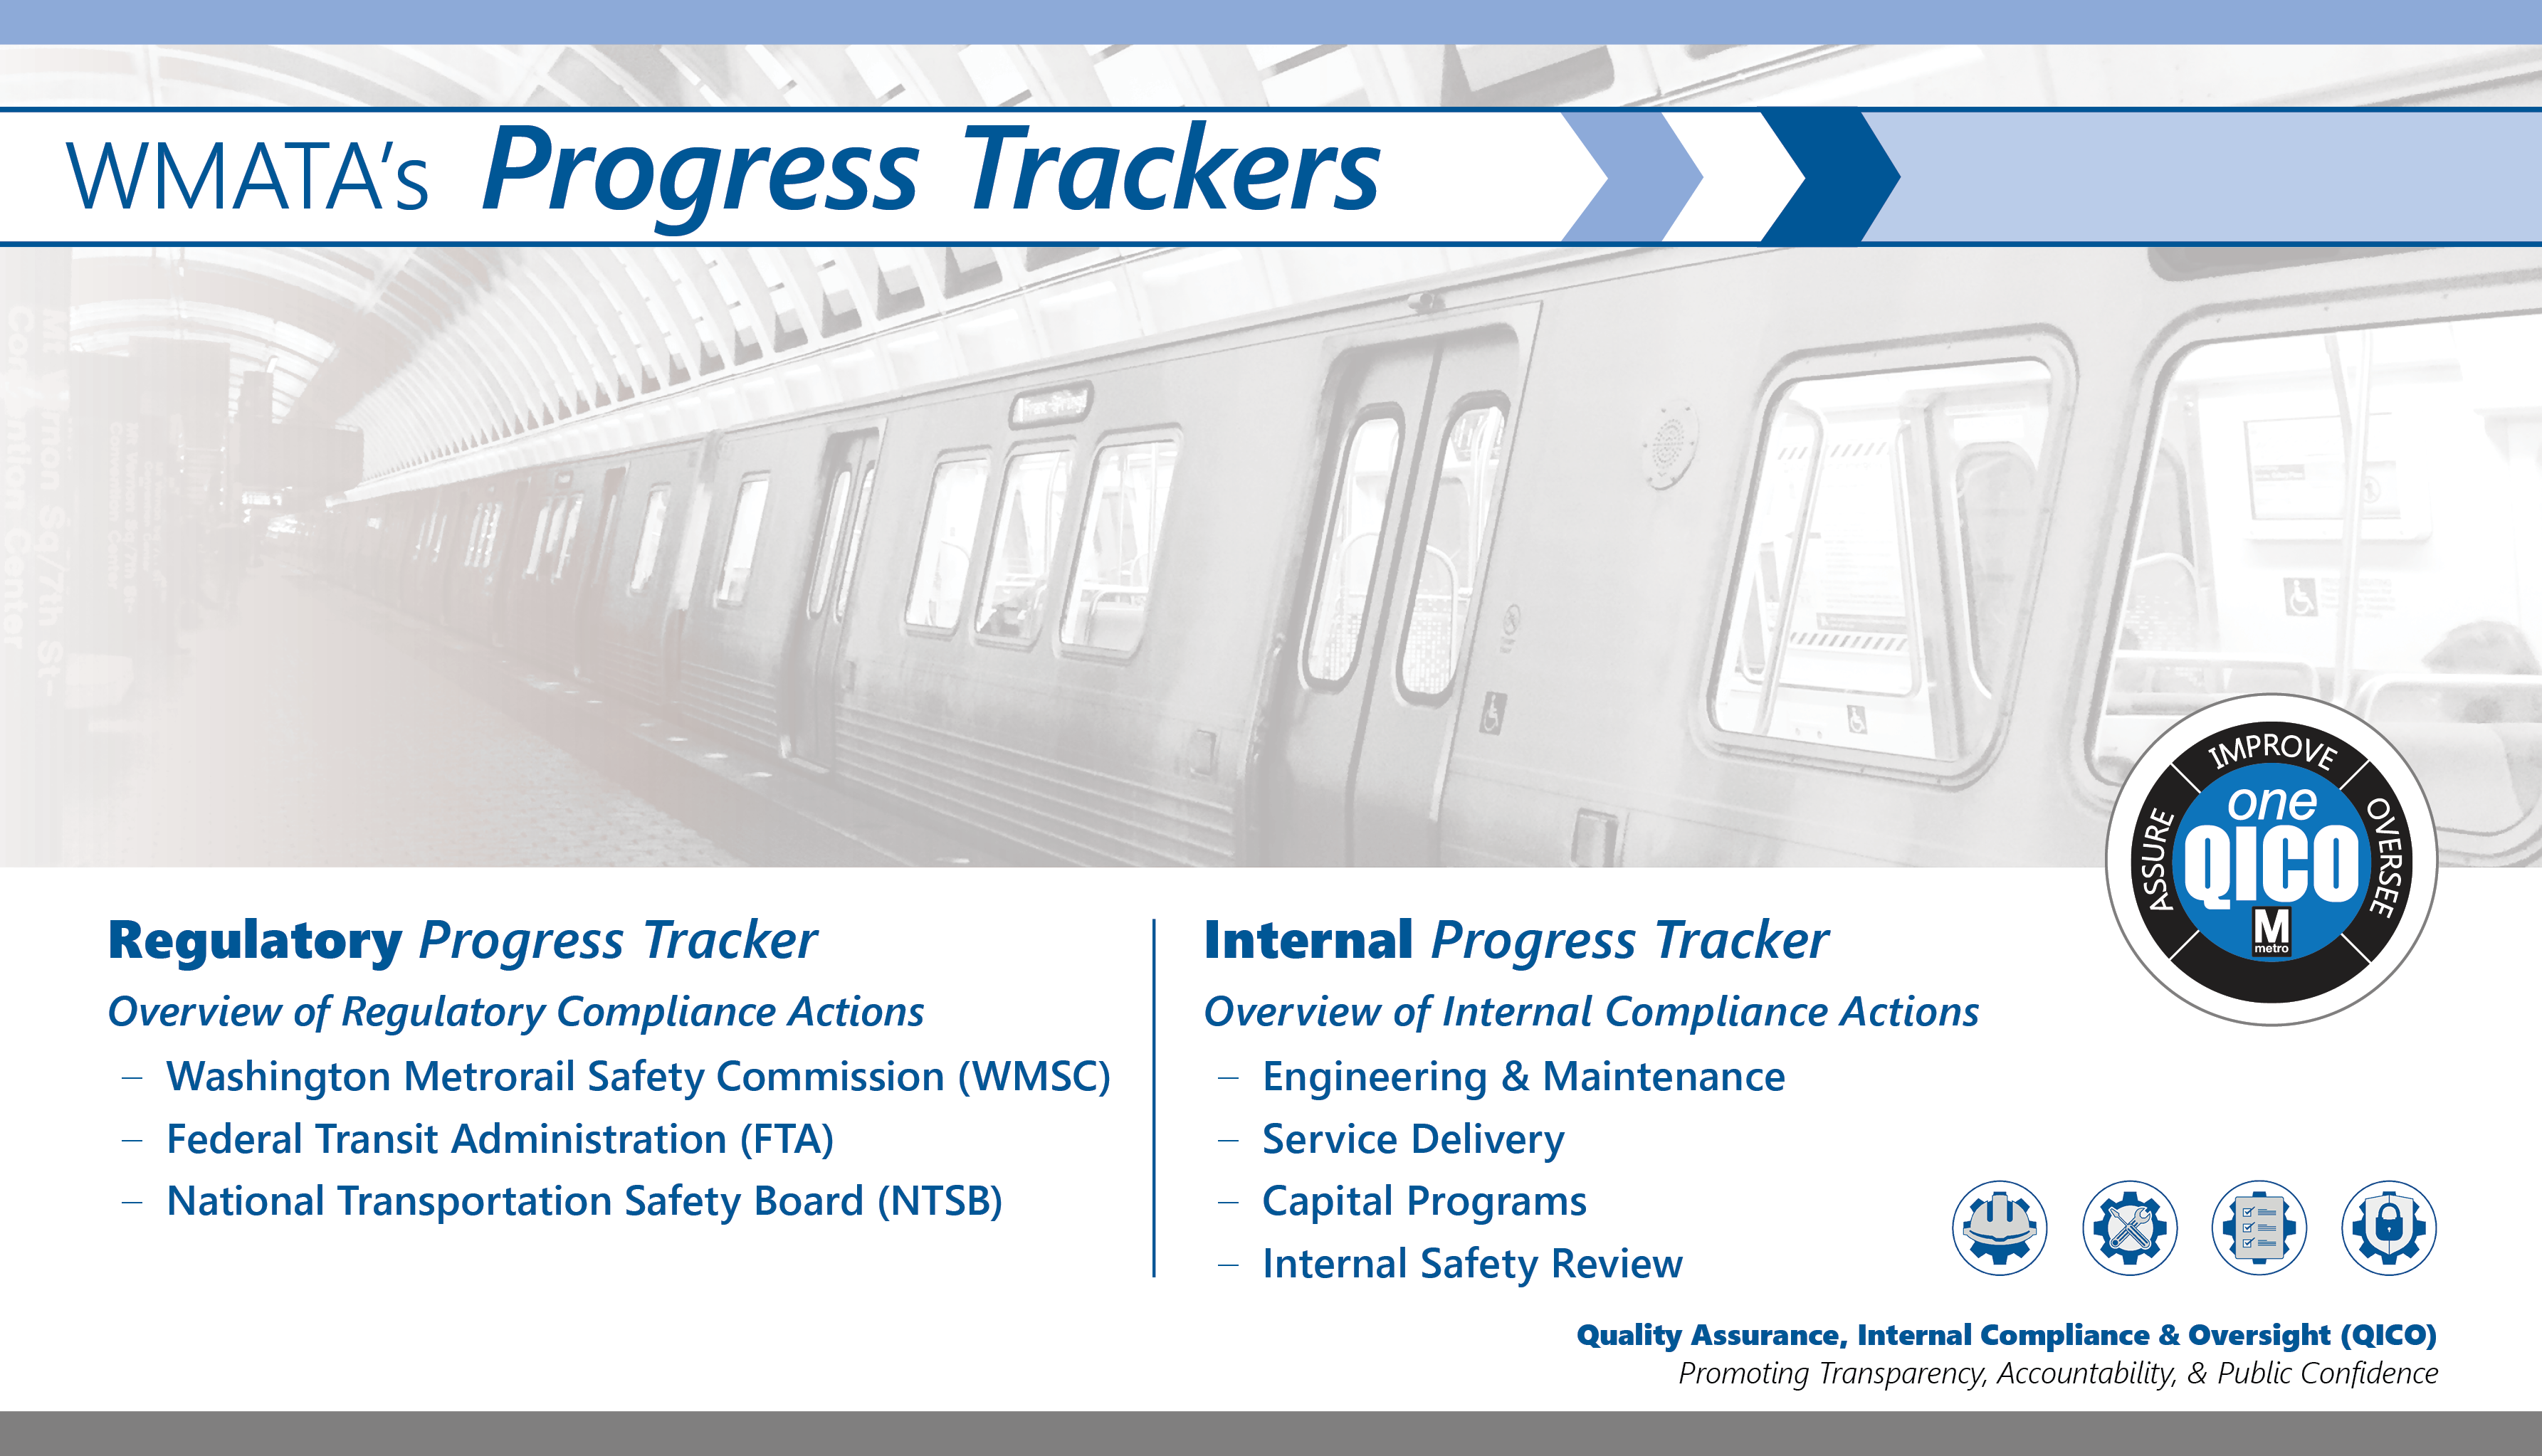 Regulatory Progress Tracker – Overview of Regulatory Compliance Actions, Washington Metrorail Safety Commission (WMSC), Federal Transit Administration (FTA), National Transportation Safety Board (NTSB). Internal Progress Tracker – Overview of Internal Compliance Actions, Engineering & Maintenance, Service Delivery, Capital Programs, Internal Safety Review.